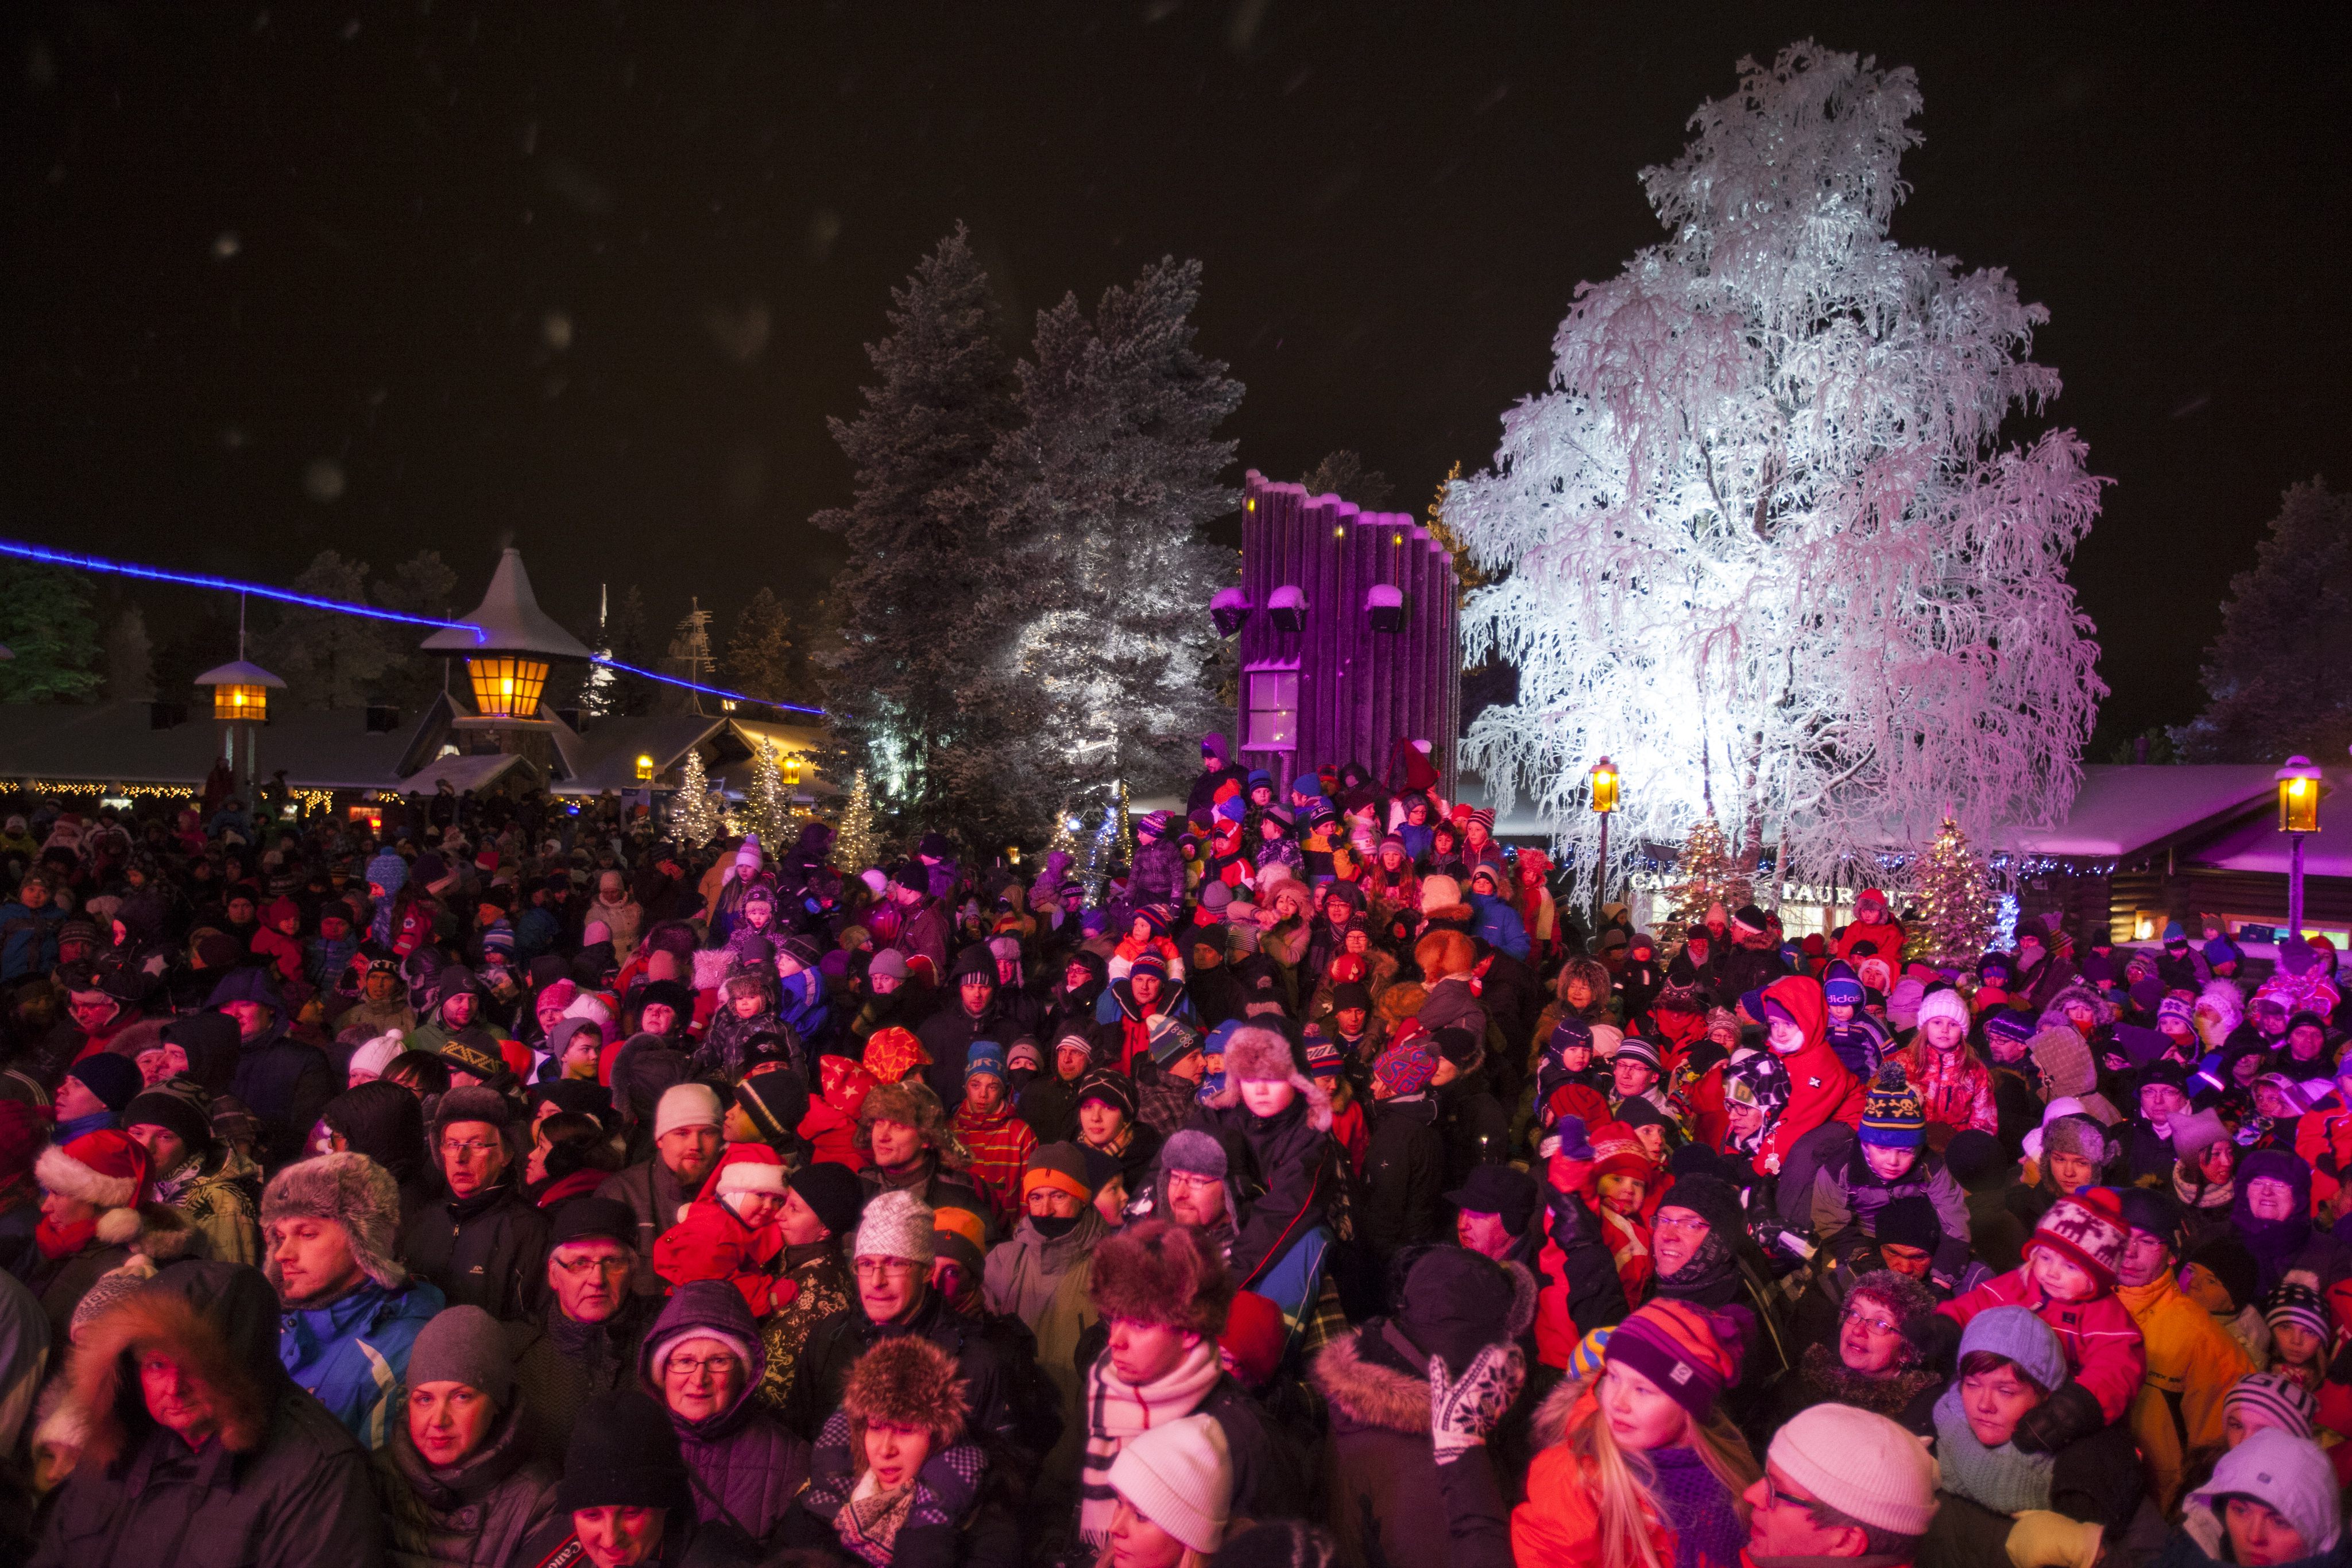 Children and adults watch Santa Claus getting ready to start the long journey to children all over the world, one day before Christmas Eve at the Arctic Circle in Rovaniemi, Finland in 2012. (Kaisa Siren/AFP/Getty Images)